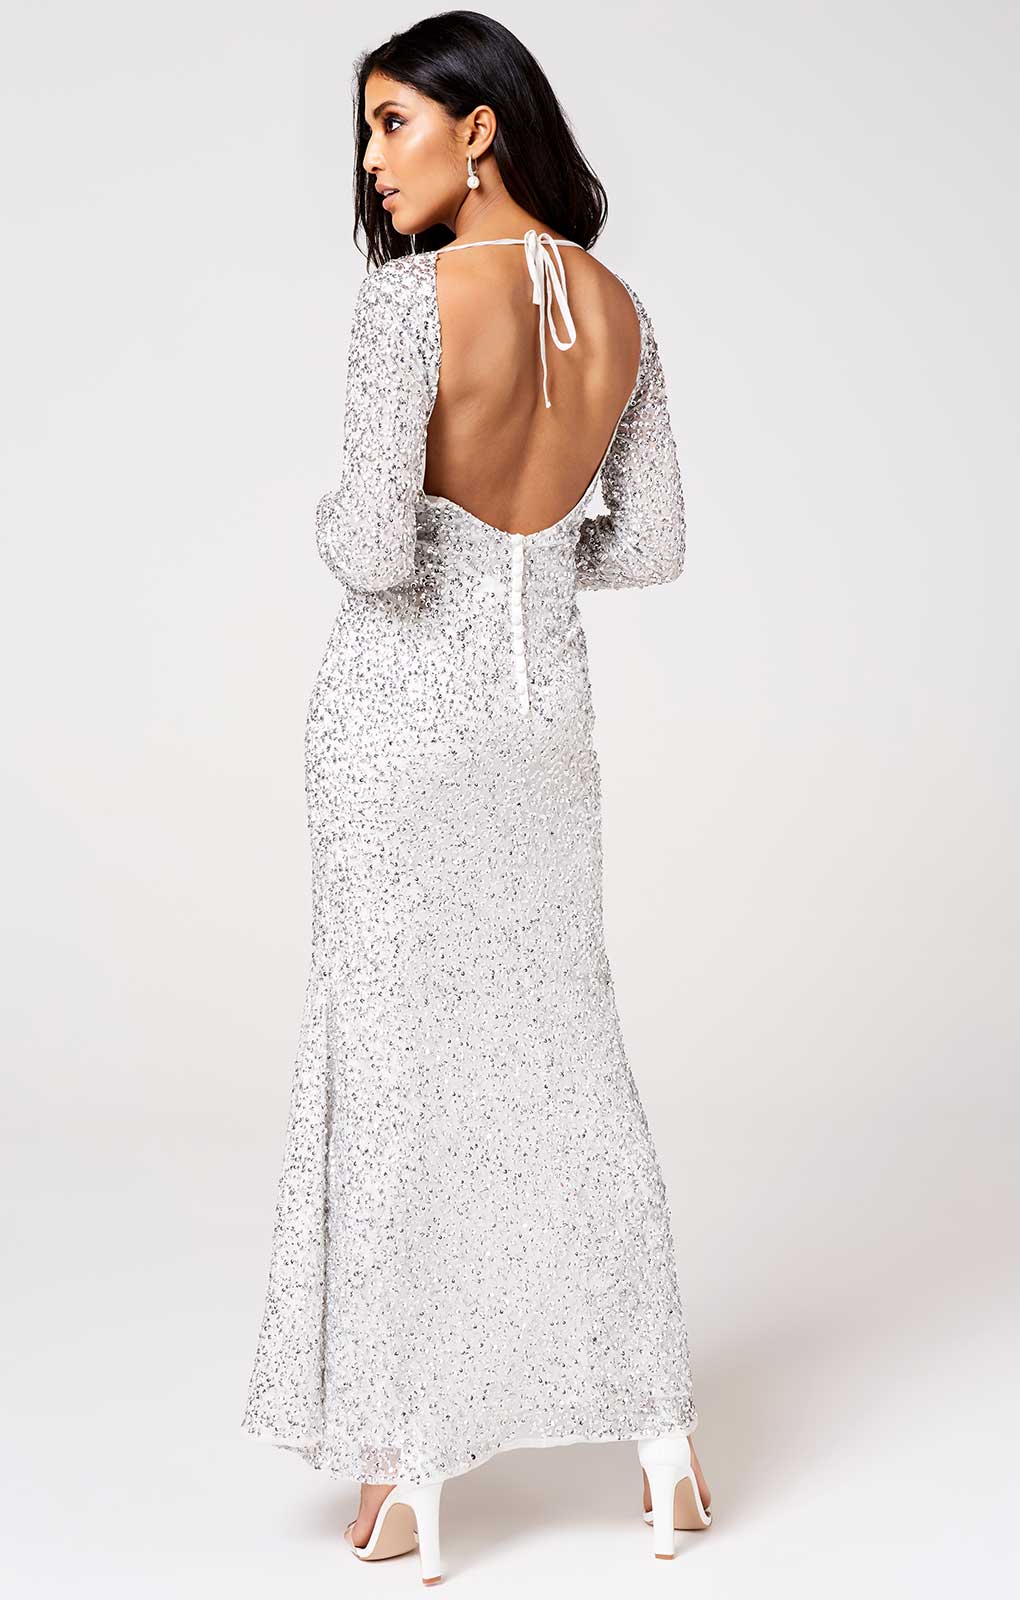 Sequin White Dress product image